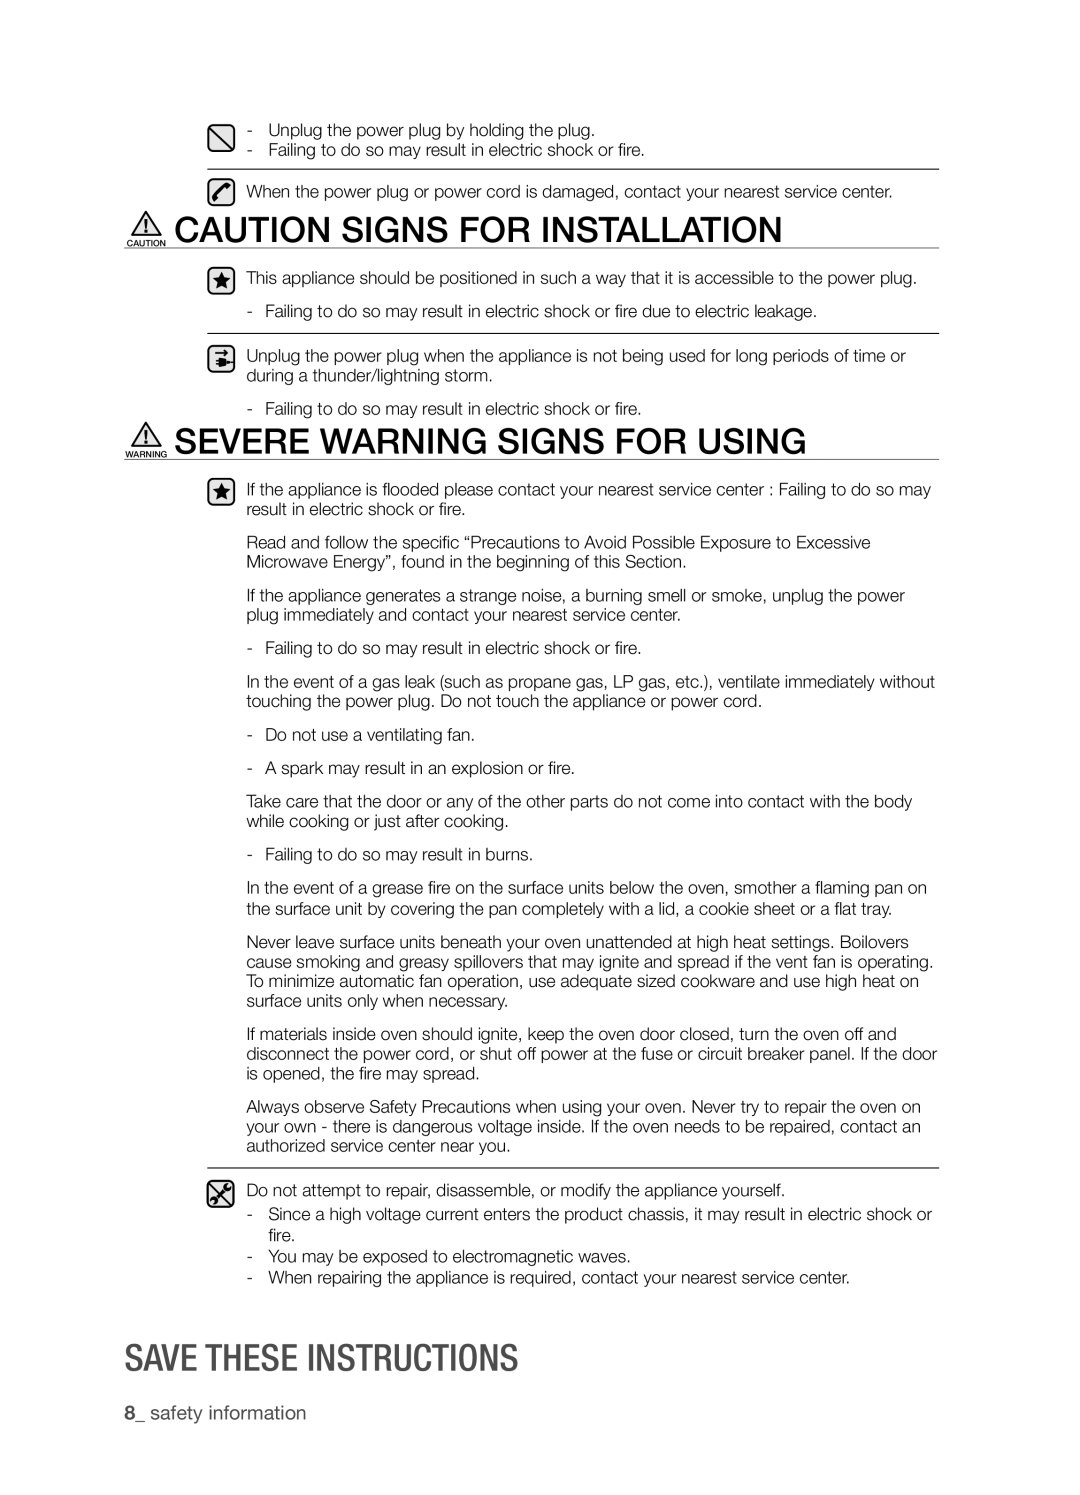 Samsung SMH8165STG Caution Caution Signs For Installation, Warning Severe Warning Signs For Using, Save these instructions 